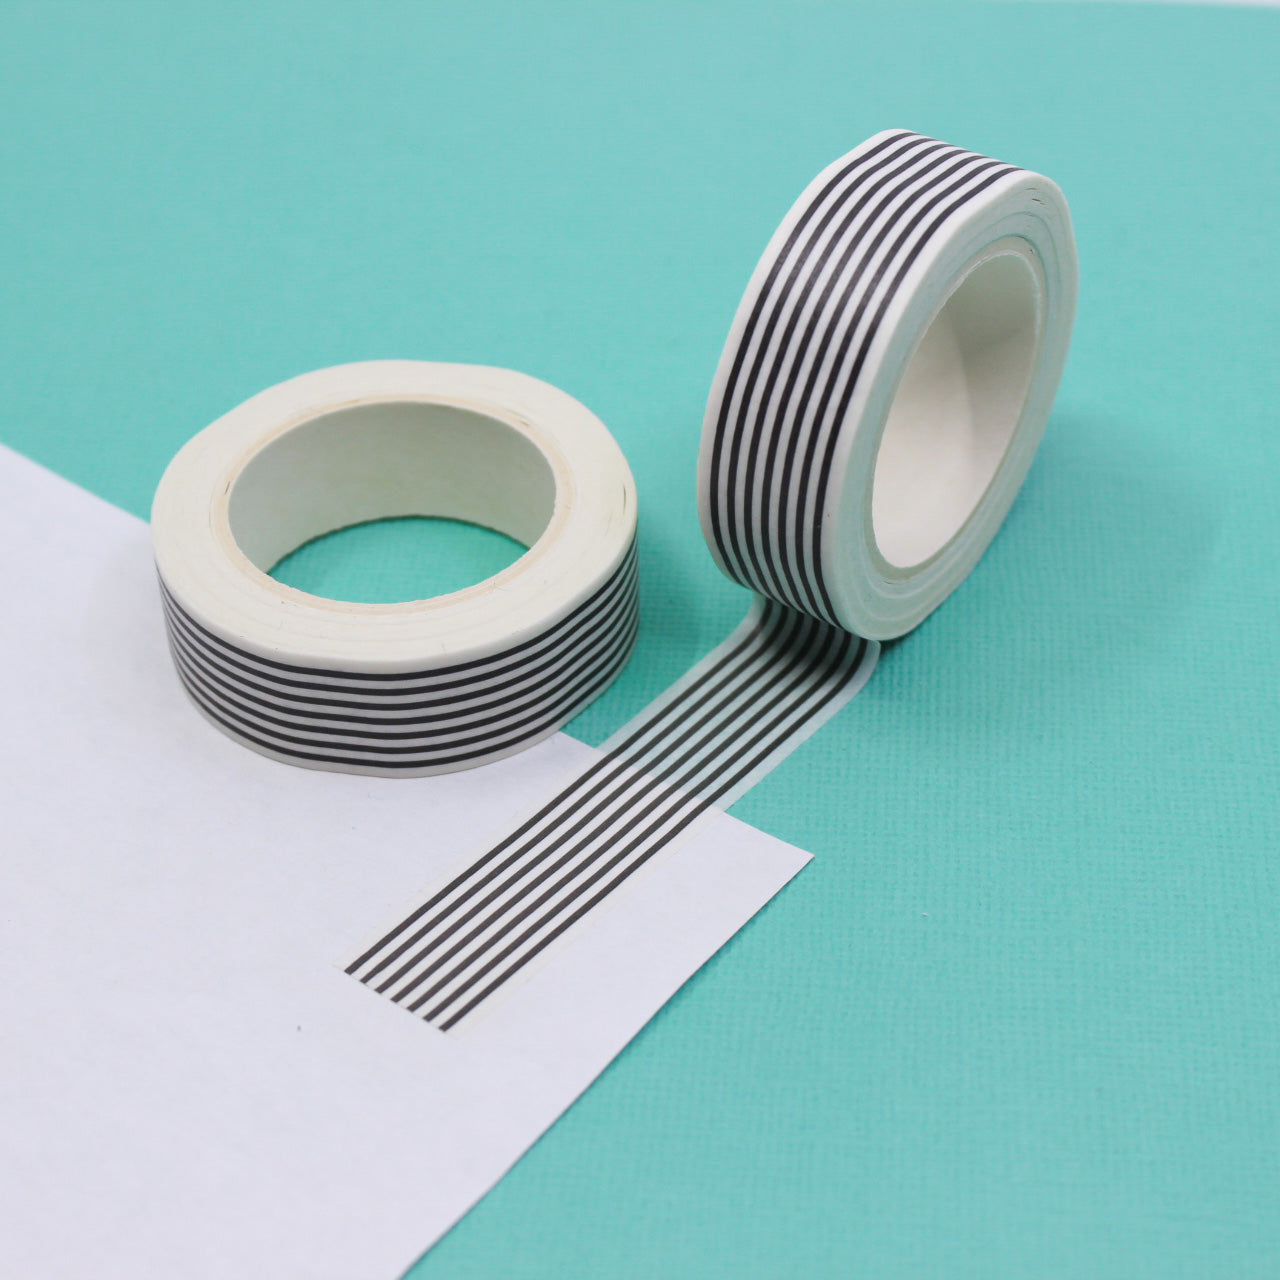 Add a timeless touch to your projects with our Classic Black & White Stripe Washi Tape, featuring a stylish and versatile stripe pattern. Ideal for creating a sleek and sophisticated look. This tape is sold at BBB Supplies Craft Shop.